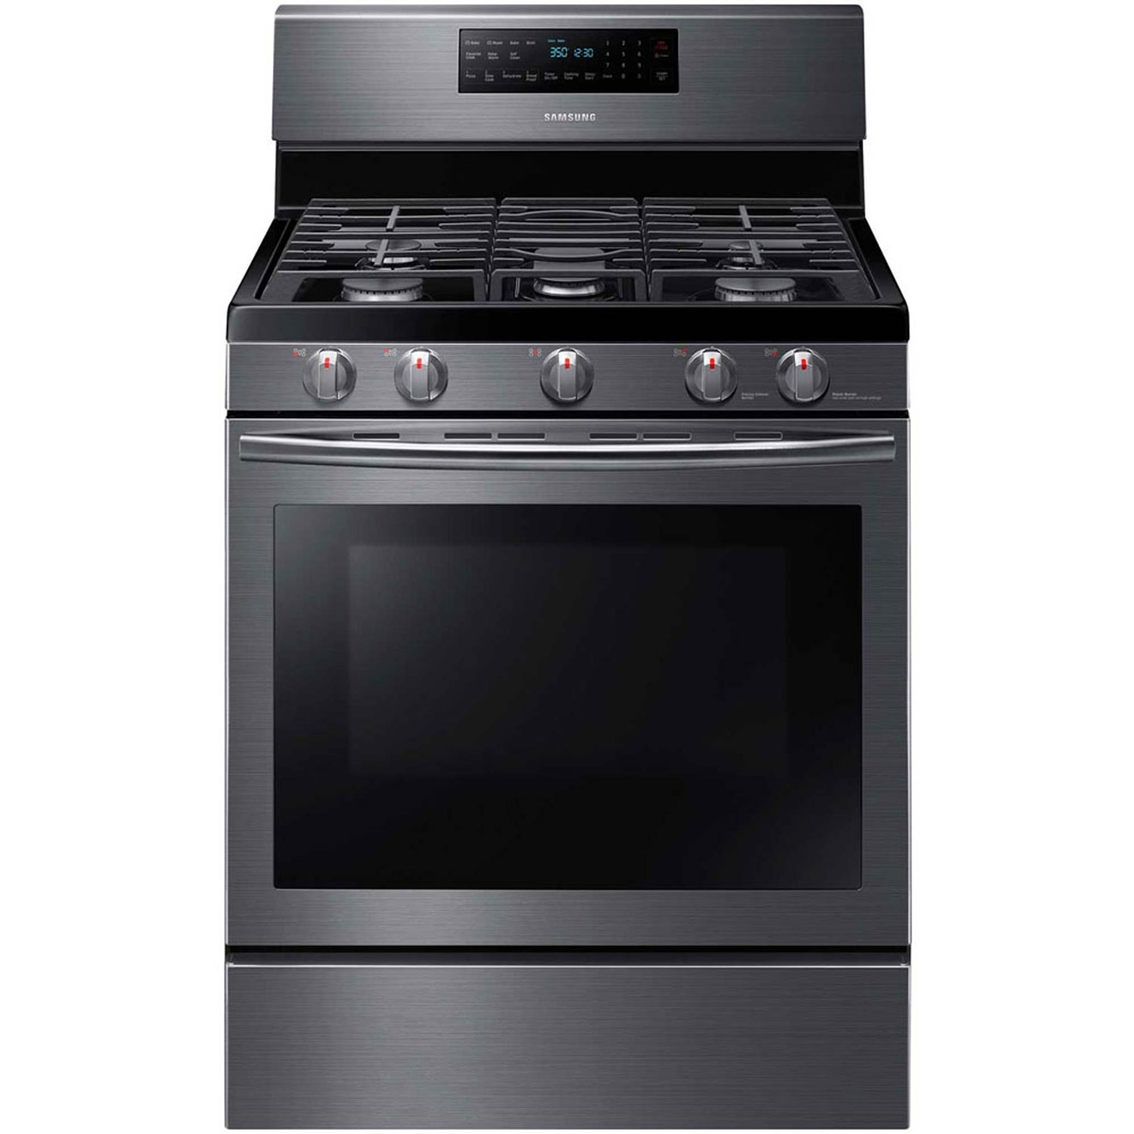 Samsung 5.8 Cu. Ft. Freestanding Gas Range With Convection 